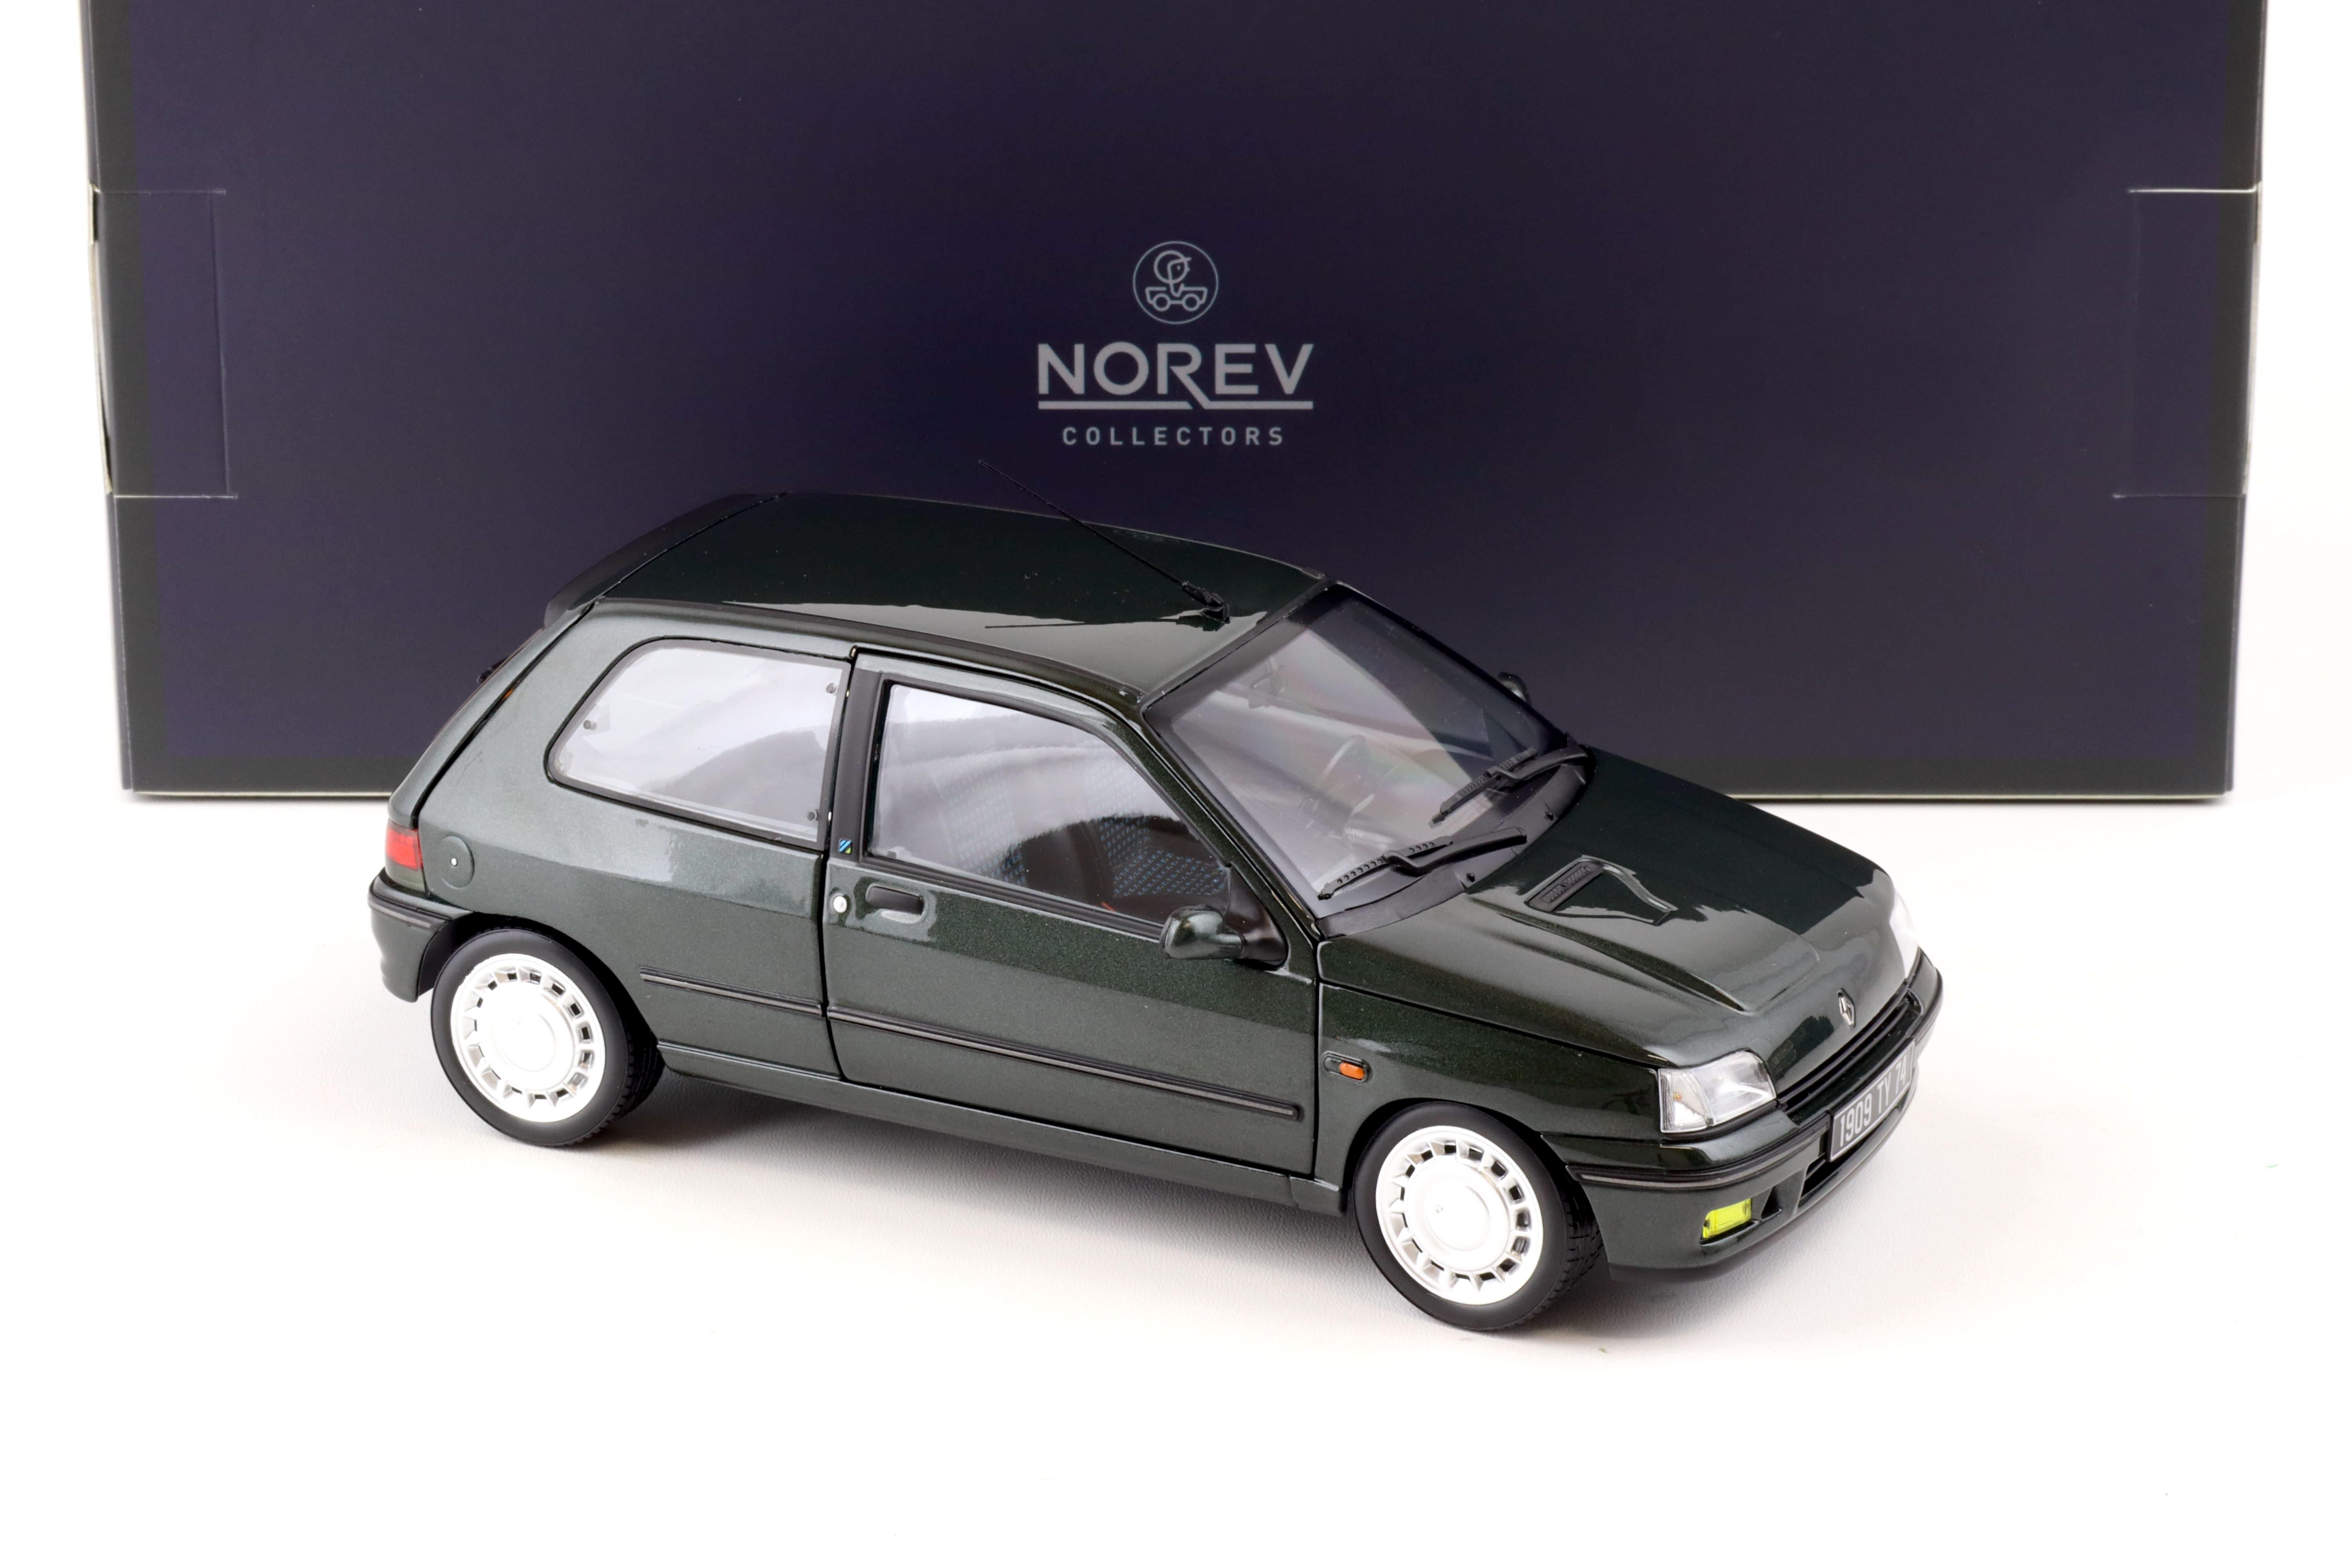 1:18 Norev Renault Clio 16S Tyrol green 1992 - Limited 400 pcs.